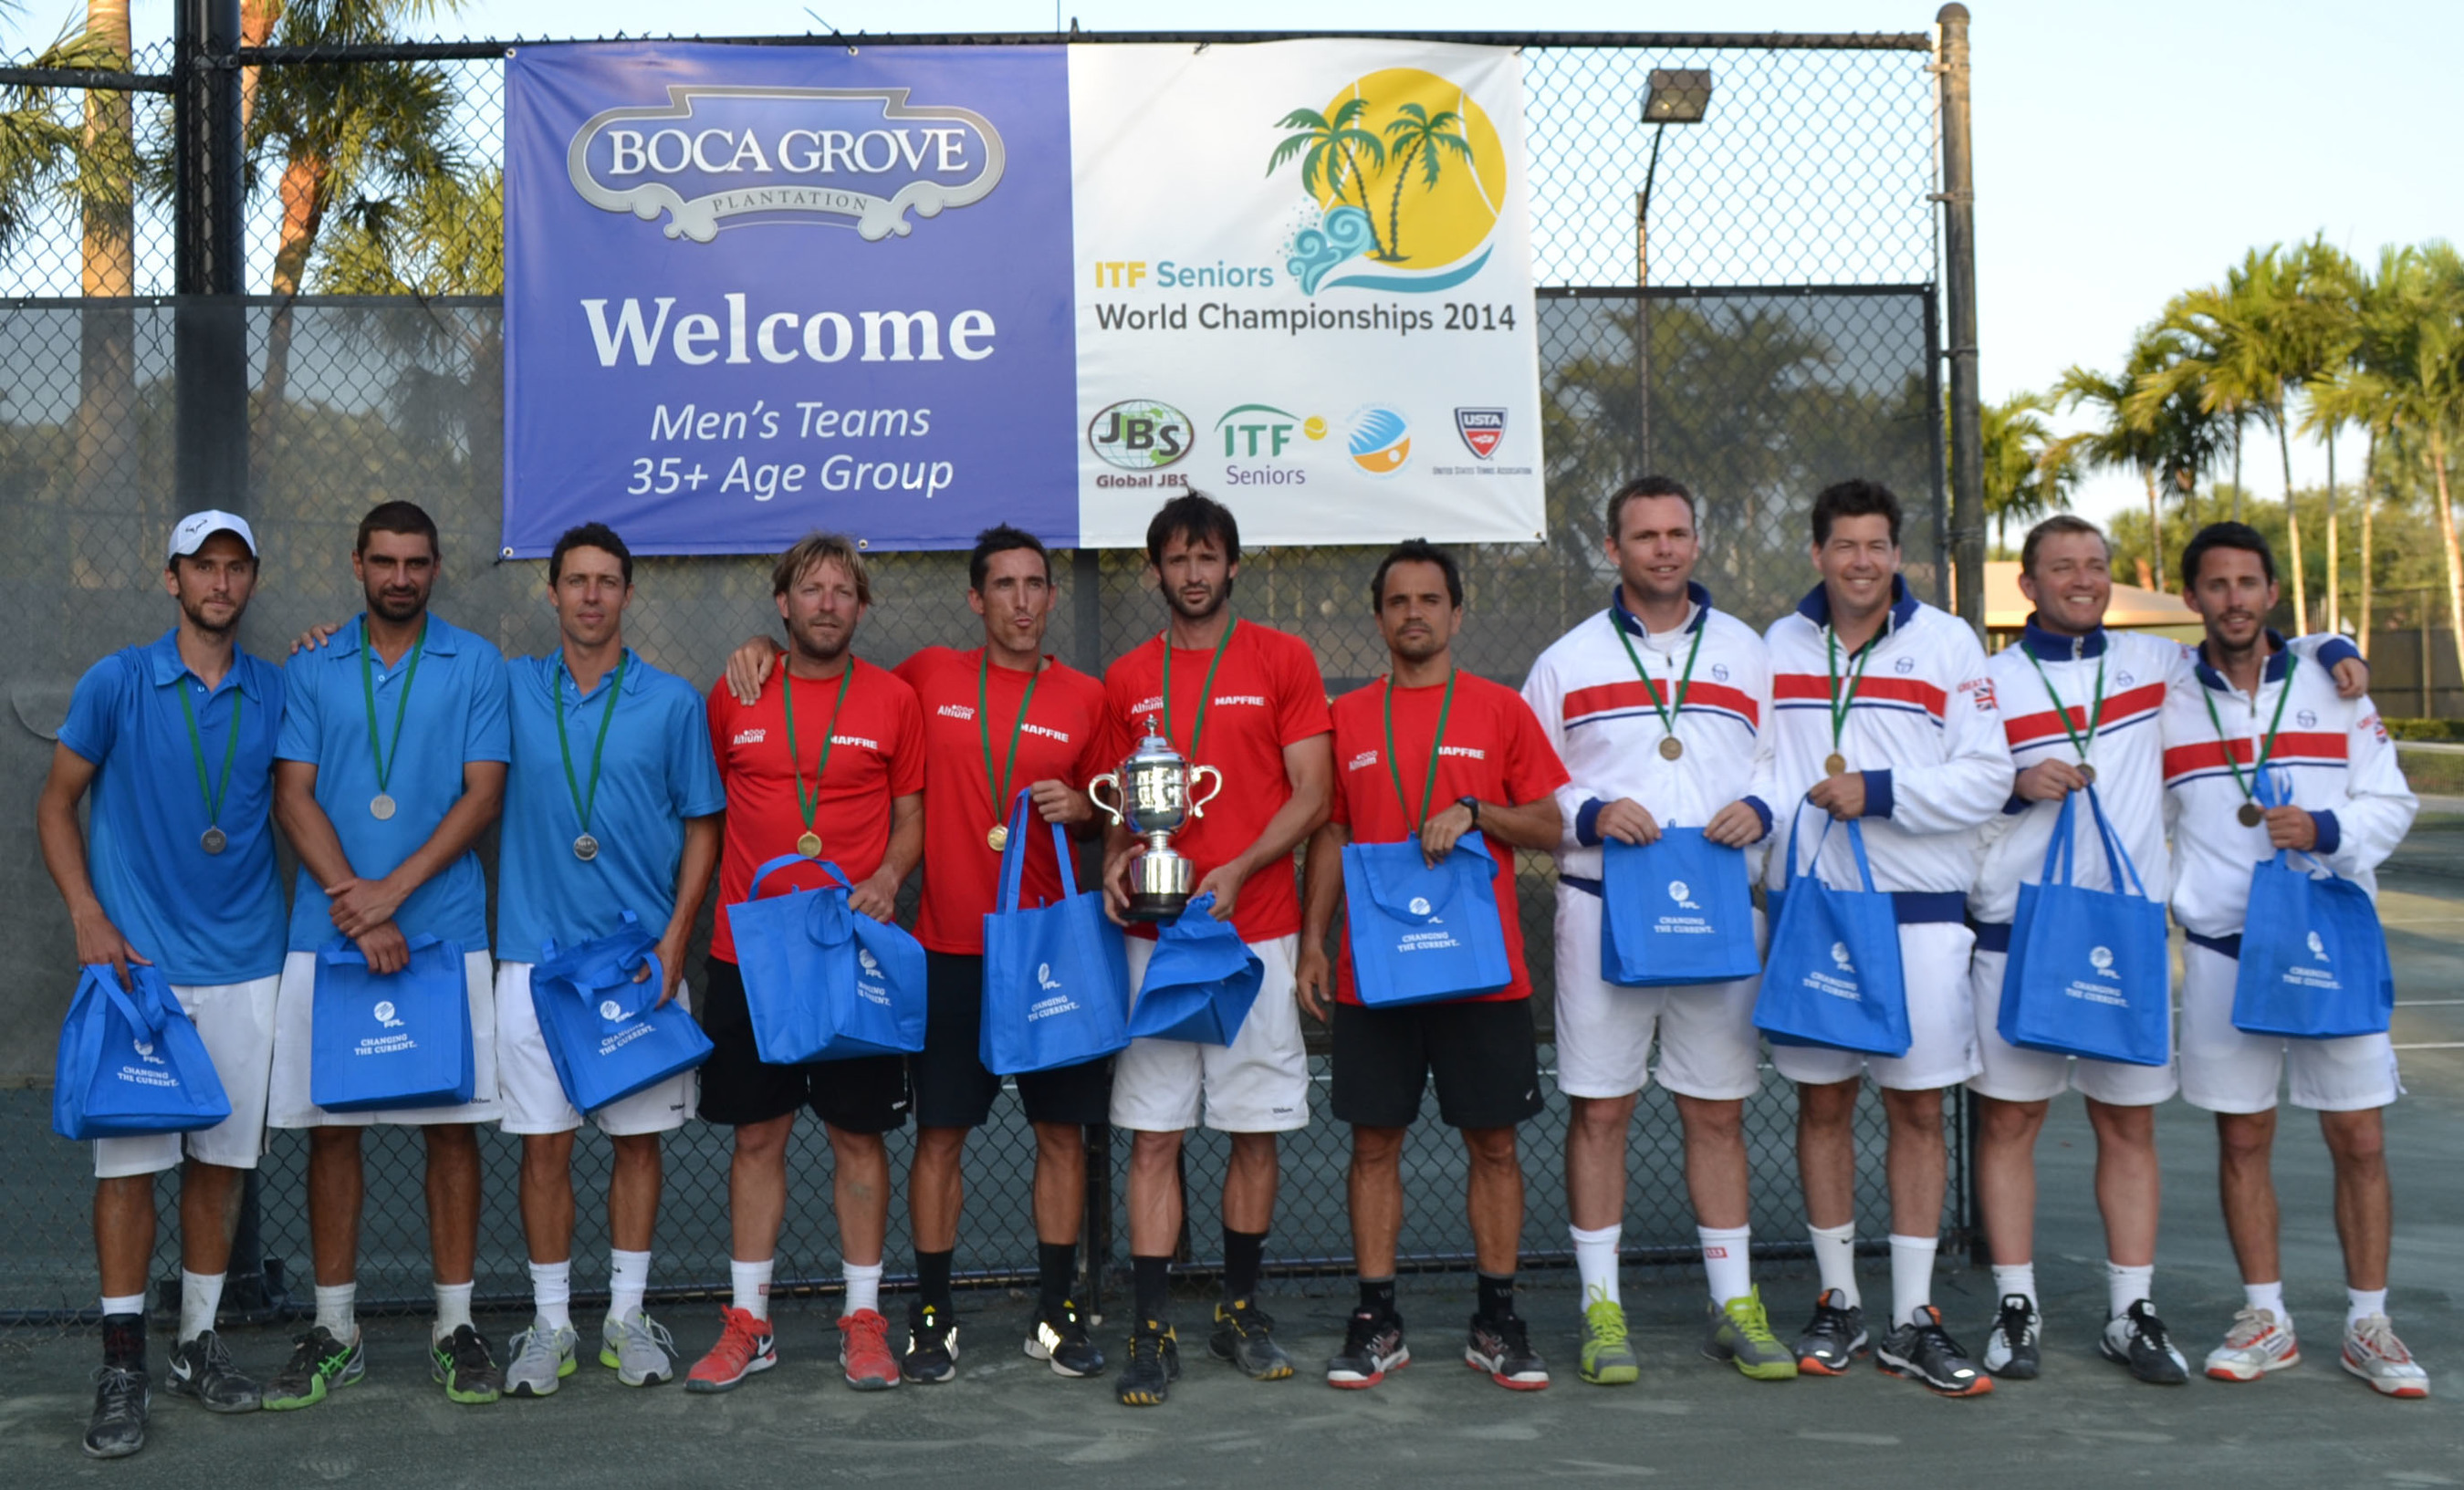 Boca Grove hosted the 2014 ITF Seniors World Championships Italia Cup (M35 teams). Spain is the 2014 champion. France took second place and Great Britain third place.   (PRNewsFoto/Boca Grove Golf and Tennis Club)